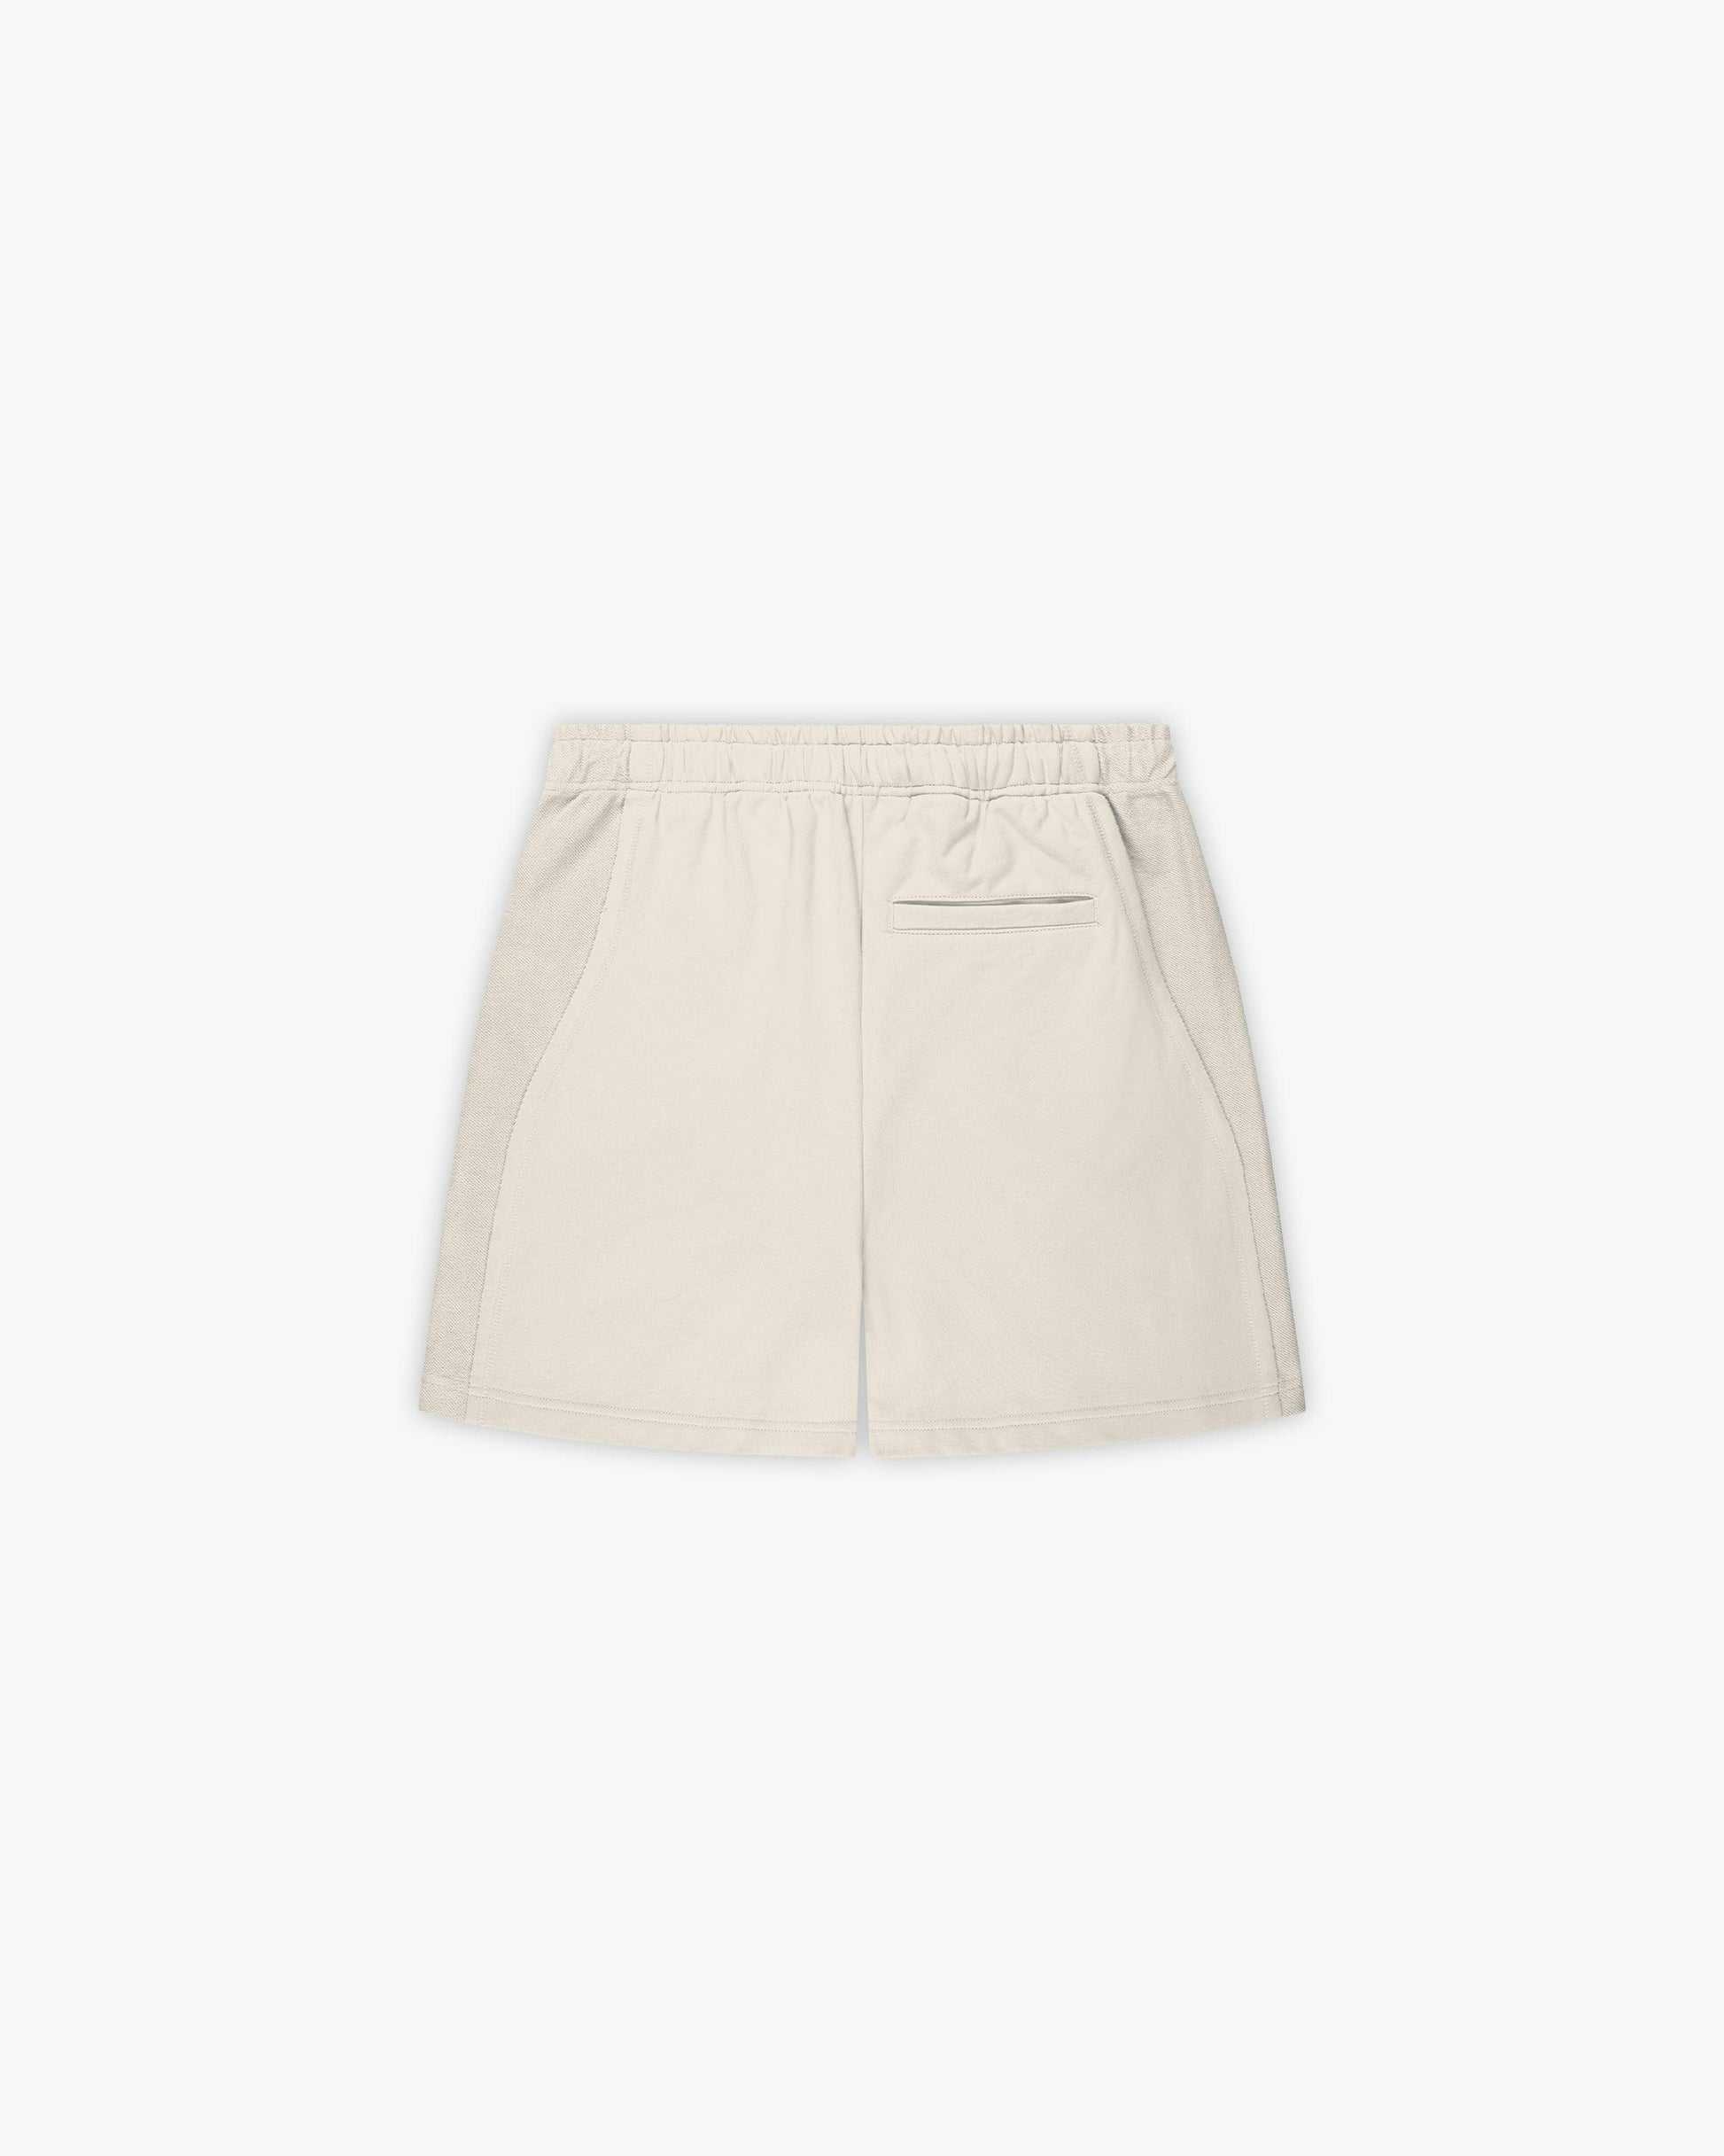 INSIDE OUT SHORTS BEIGE - VICINITY